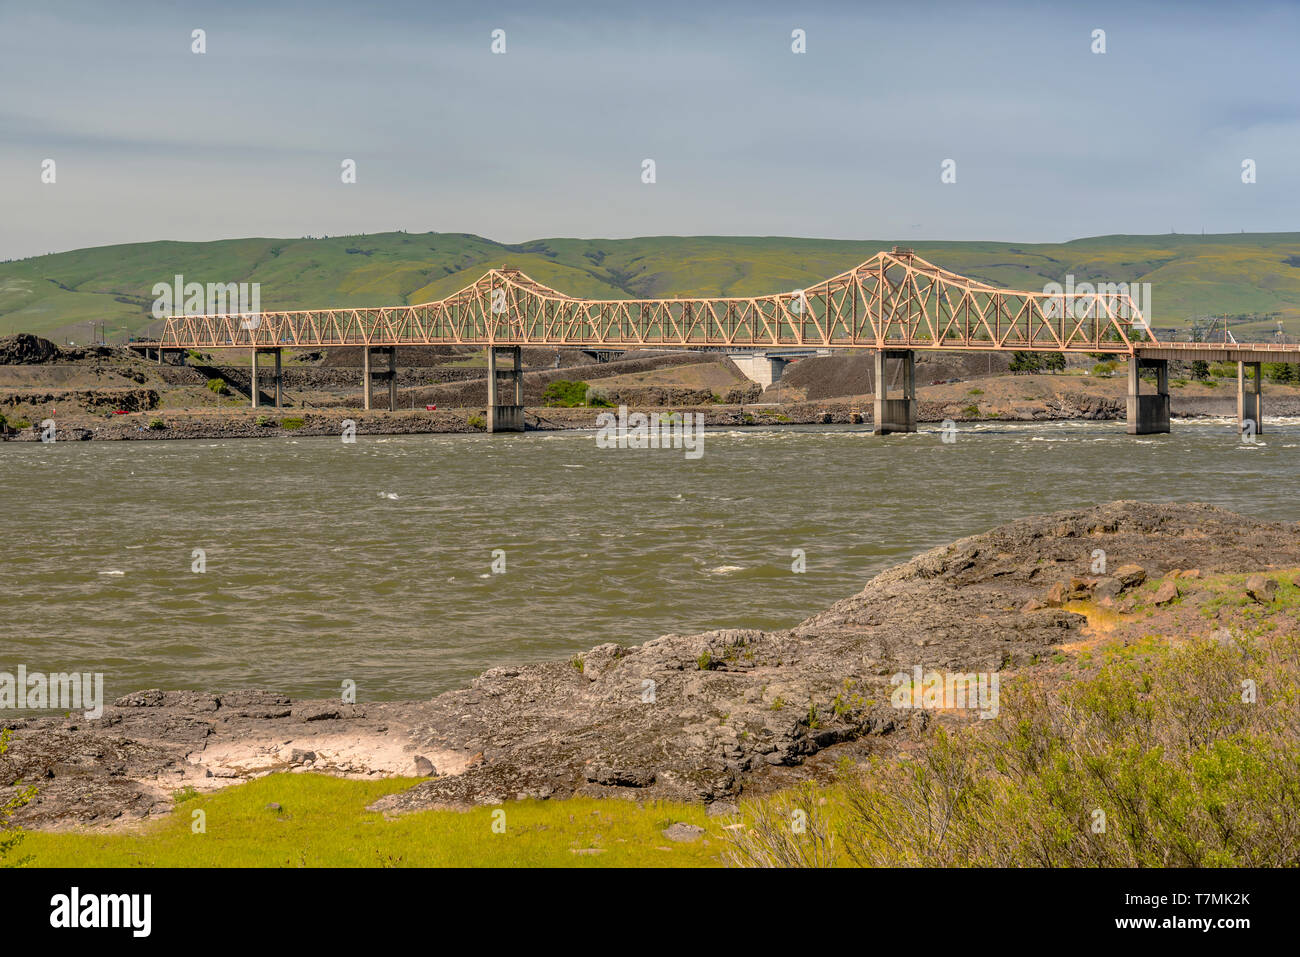 Bridge crossings and columbia river at the Dalles Oregon state. Stock Photo